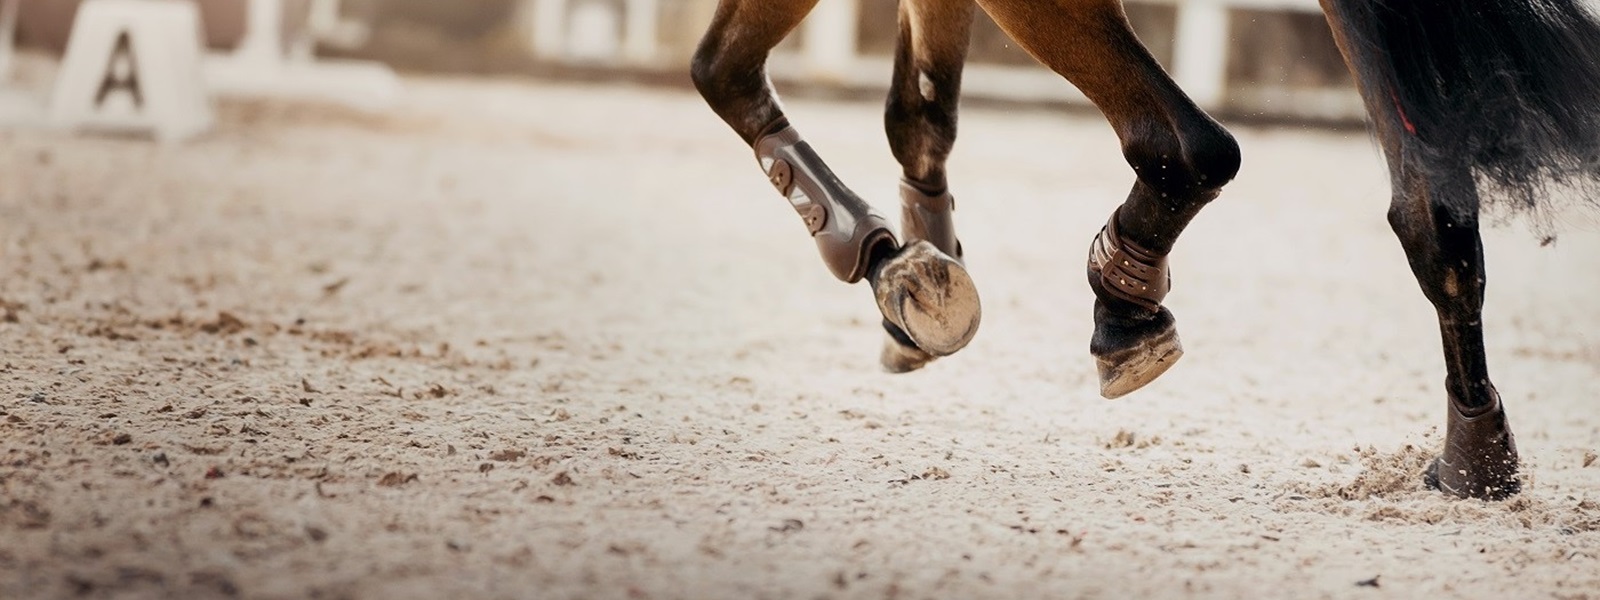 Image of horse legs as the horse runs